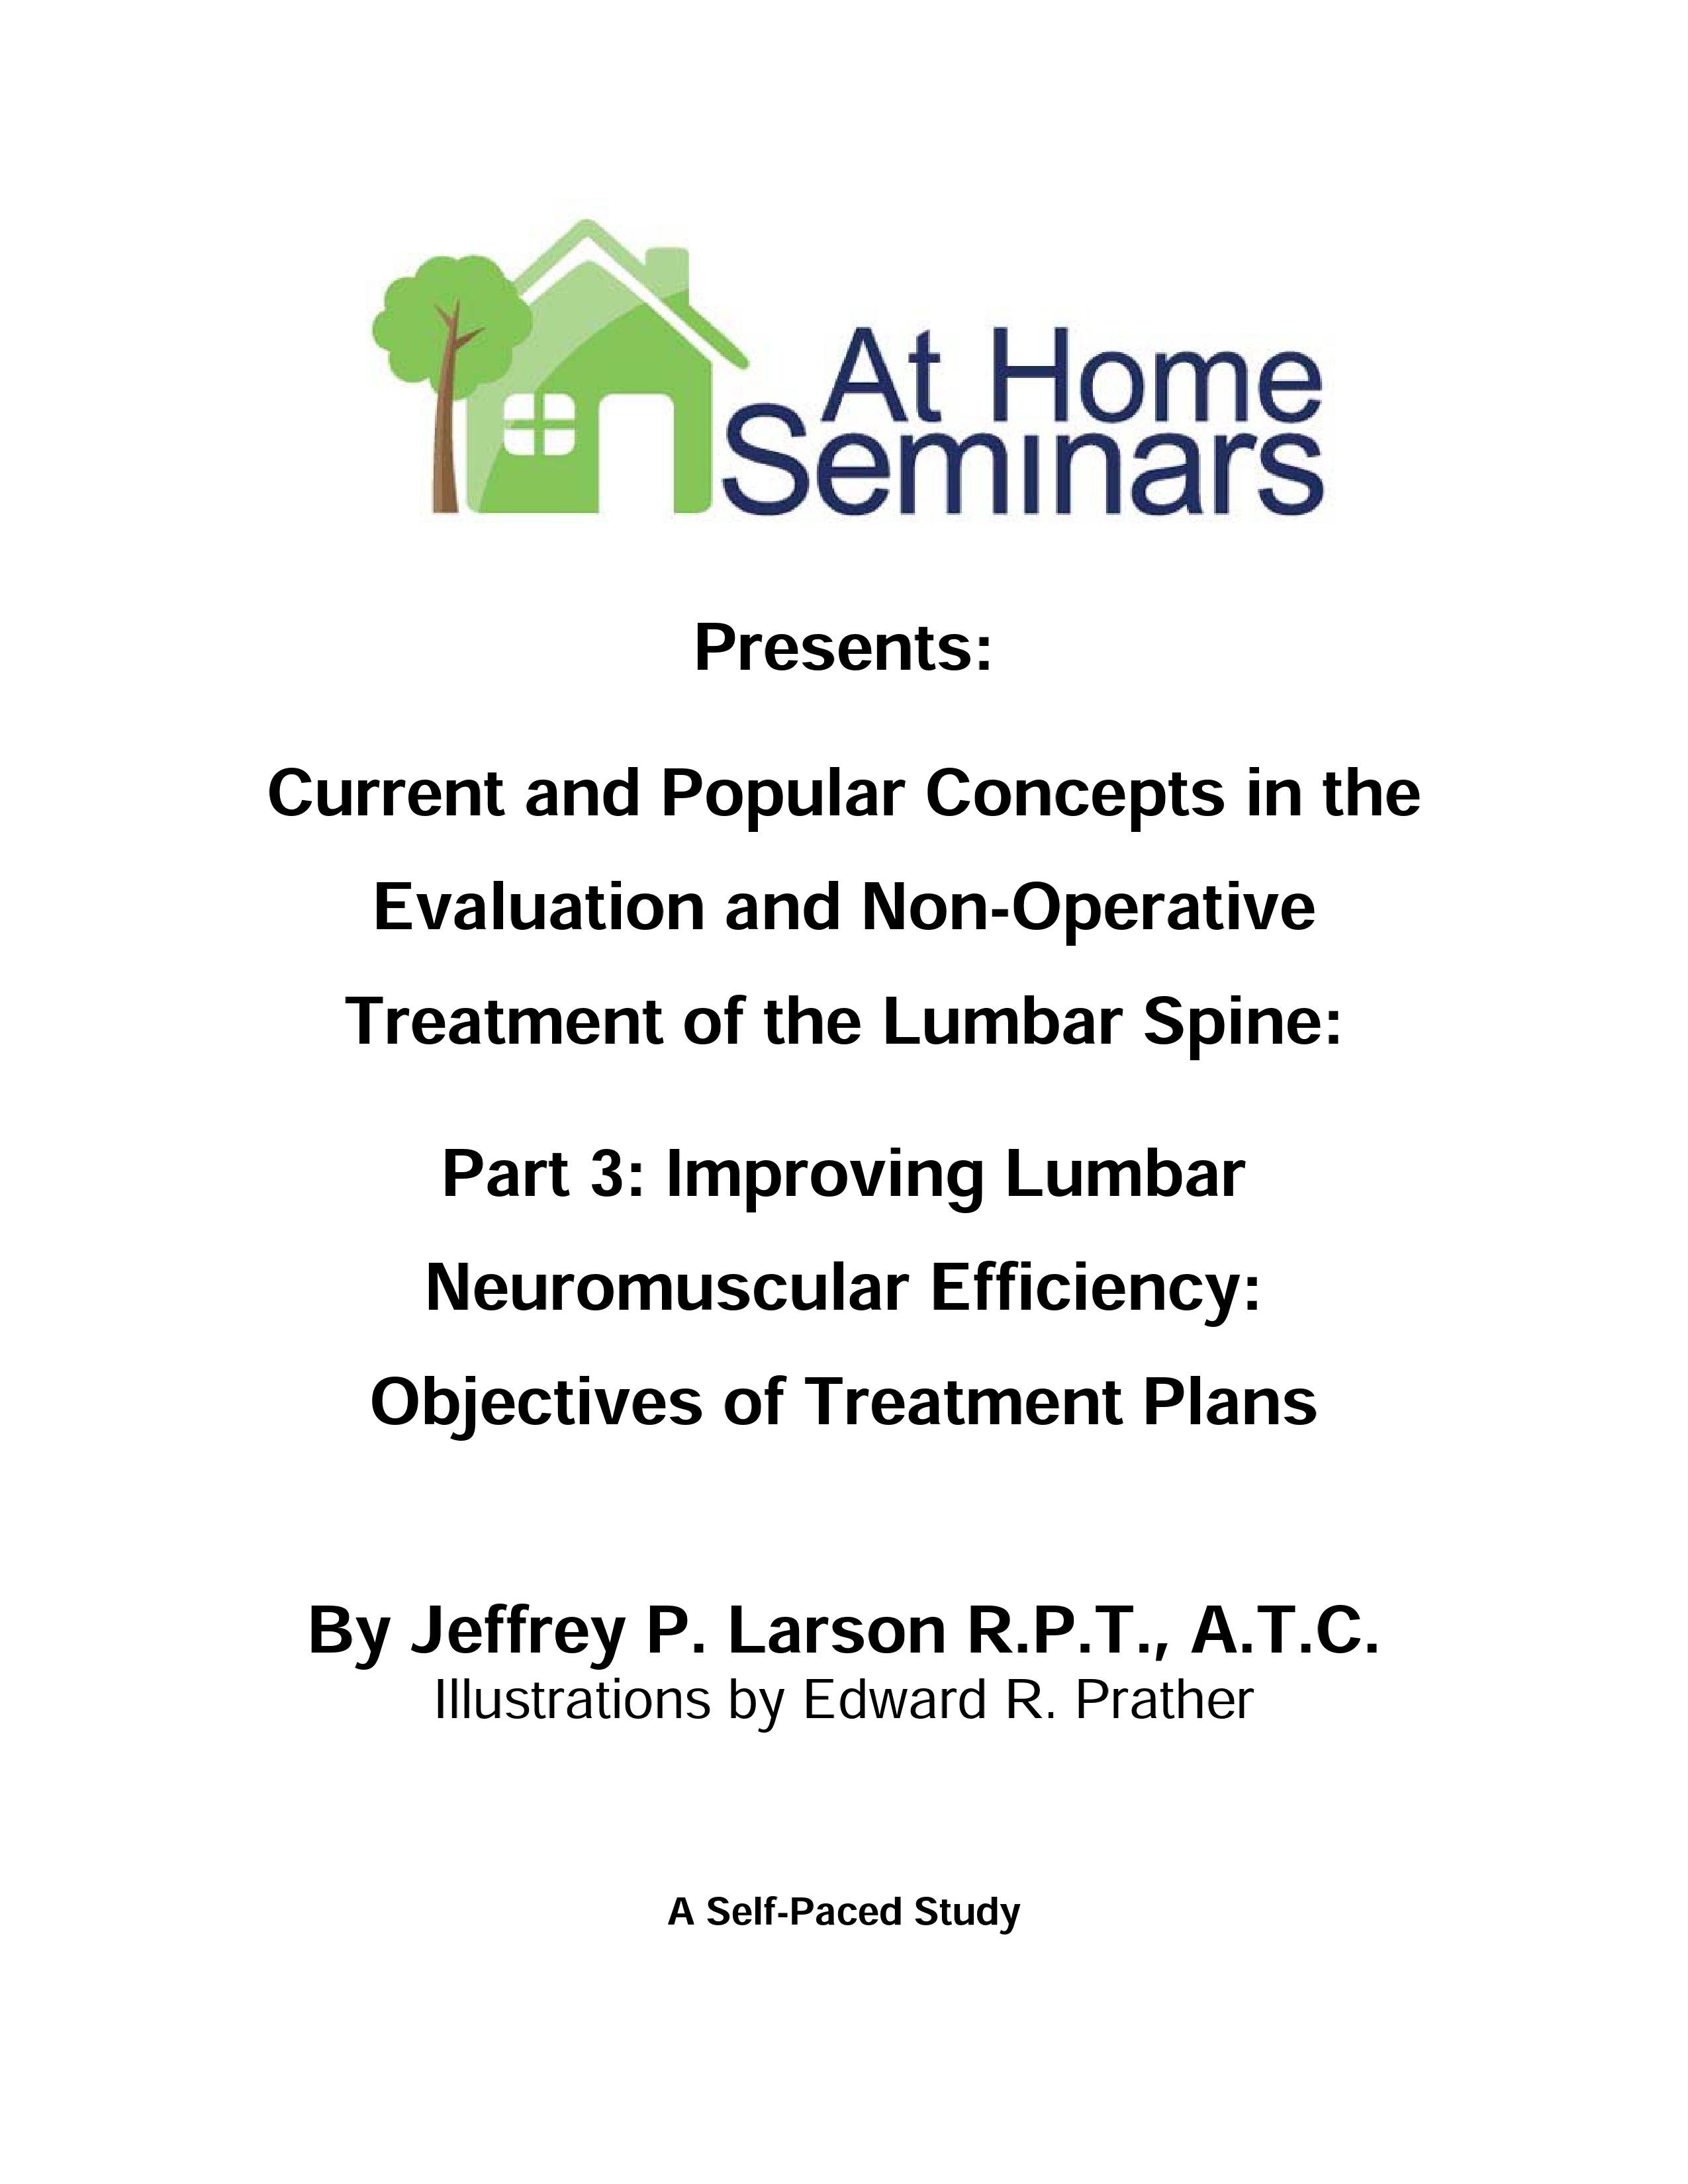 Share A Course: Current & Popular Concepts in the Evaluation and Non-Operative Treatment of the Lumbar Spine: Part 3: Improving Lumbar Neuromuscular Efficiency: Objectives of Treatment Plans (Electronic Download)